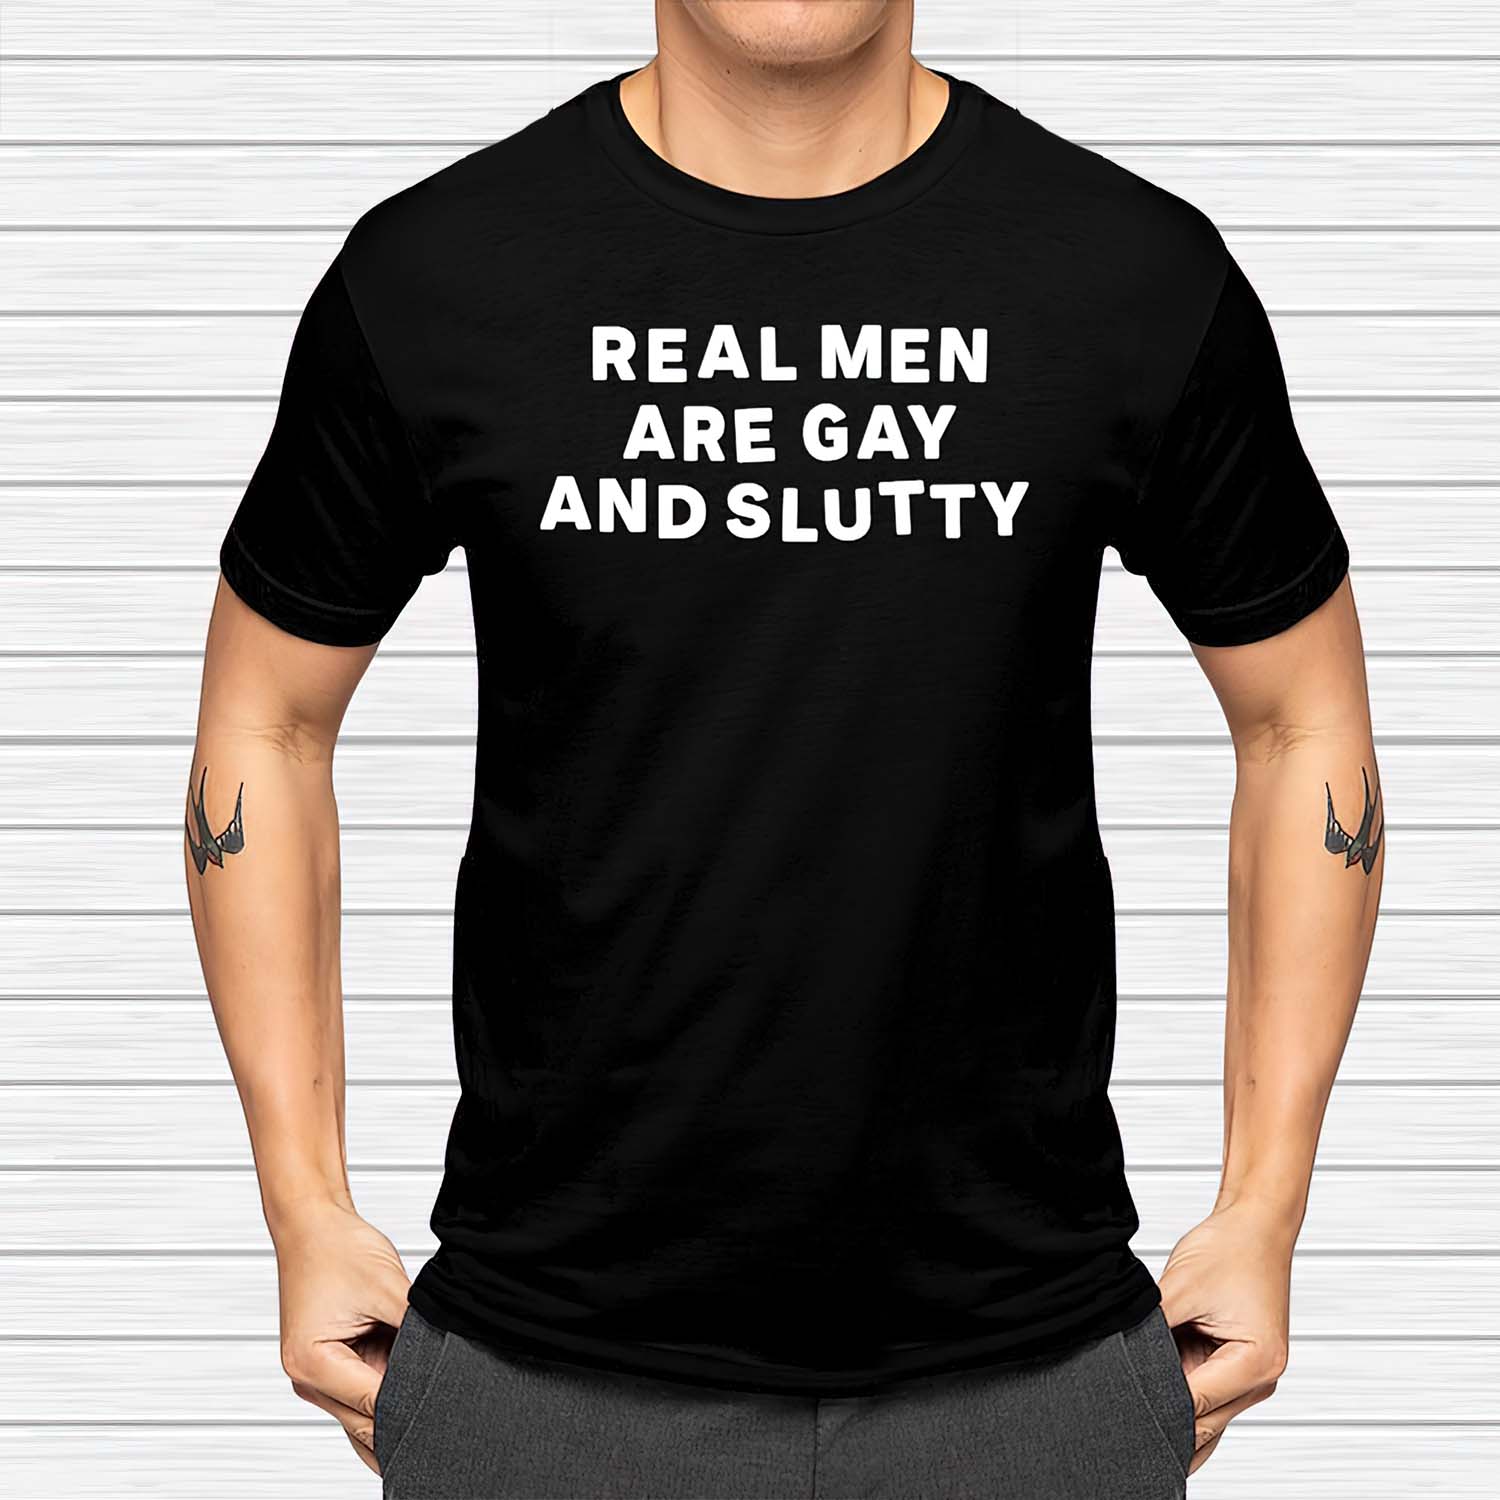 Real Men Are Gay And Sl*Tty Shirt